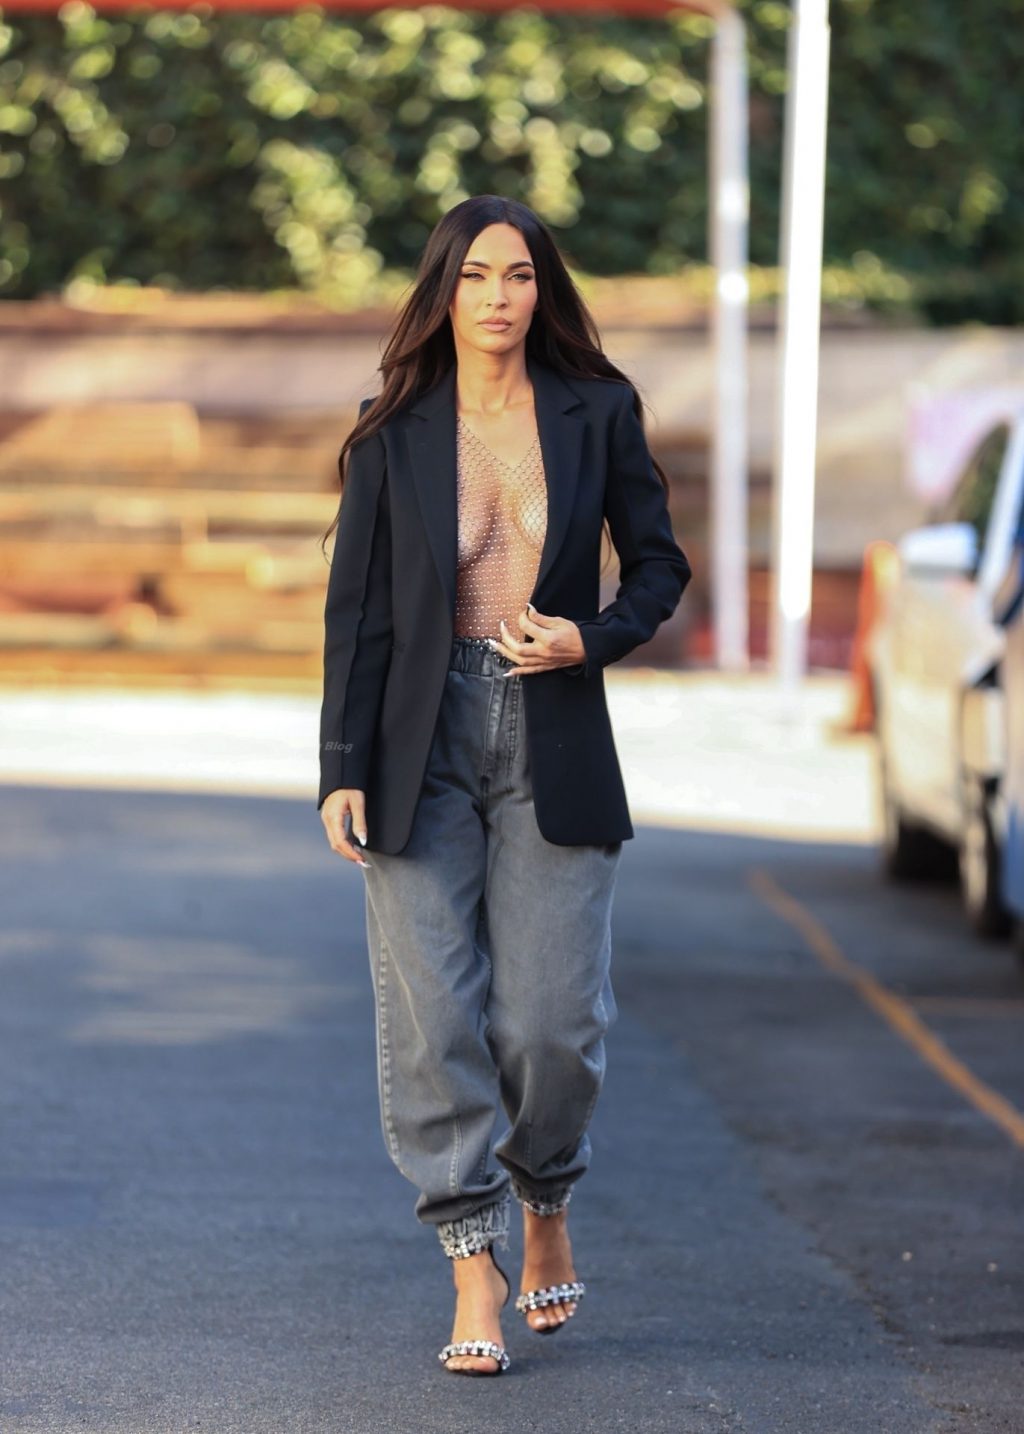 Megan Fox Leaves Little to Imagination While Leaving a Photoshoot in LA (27 Photos)